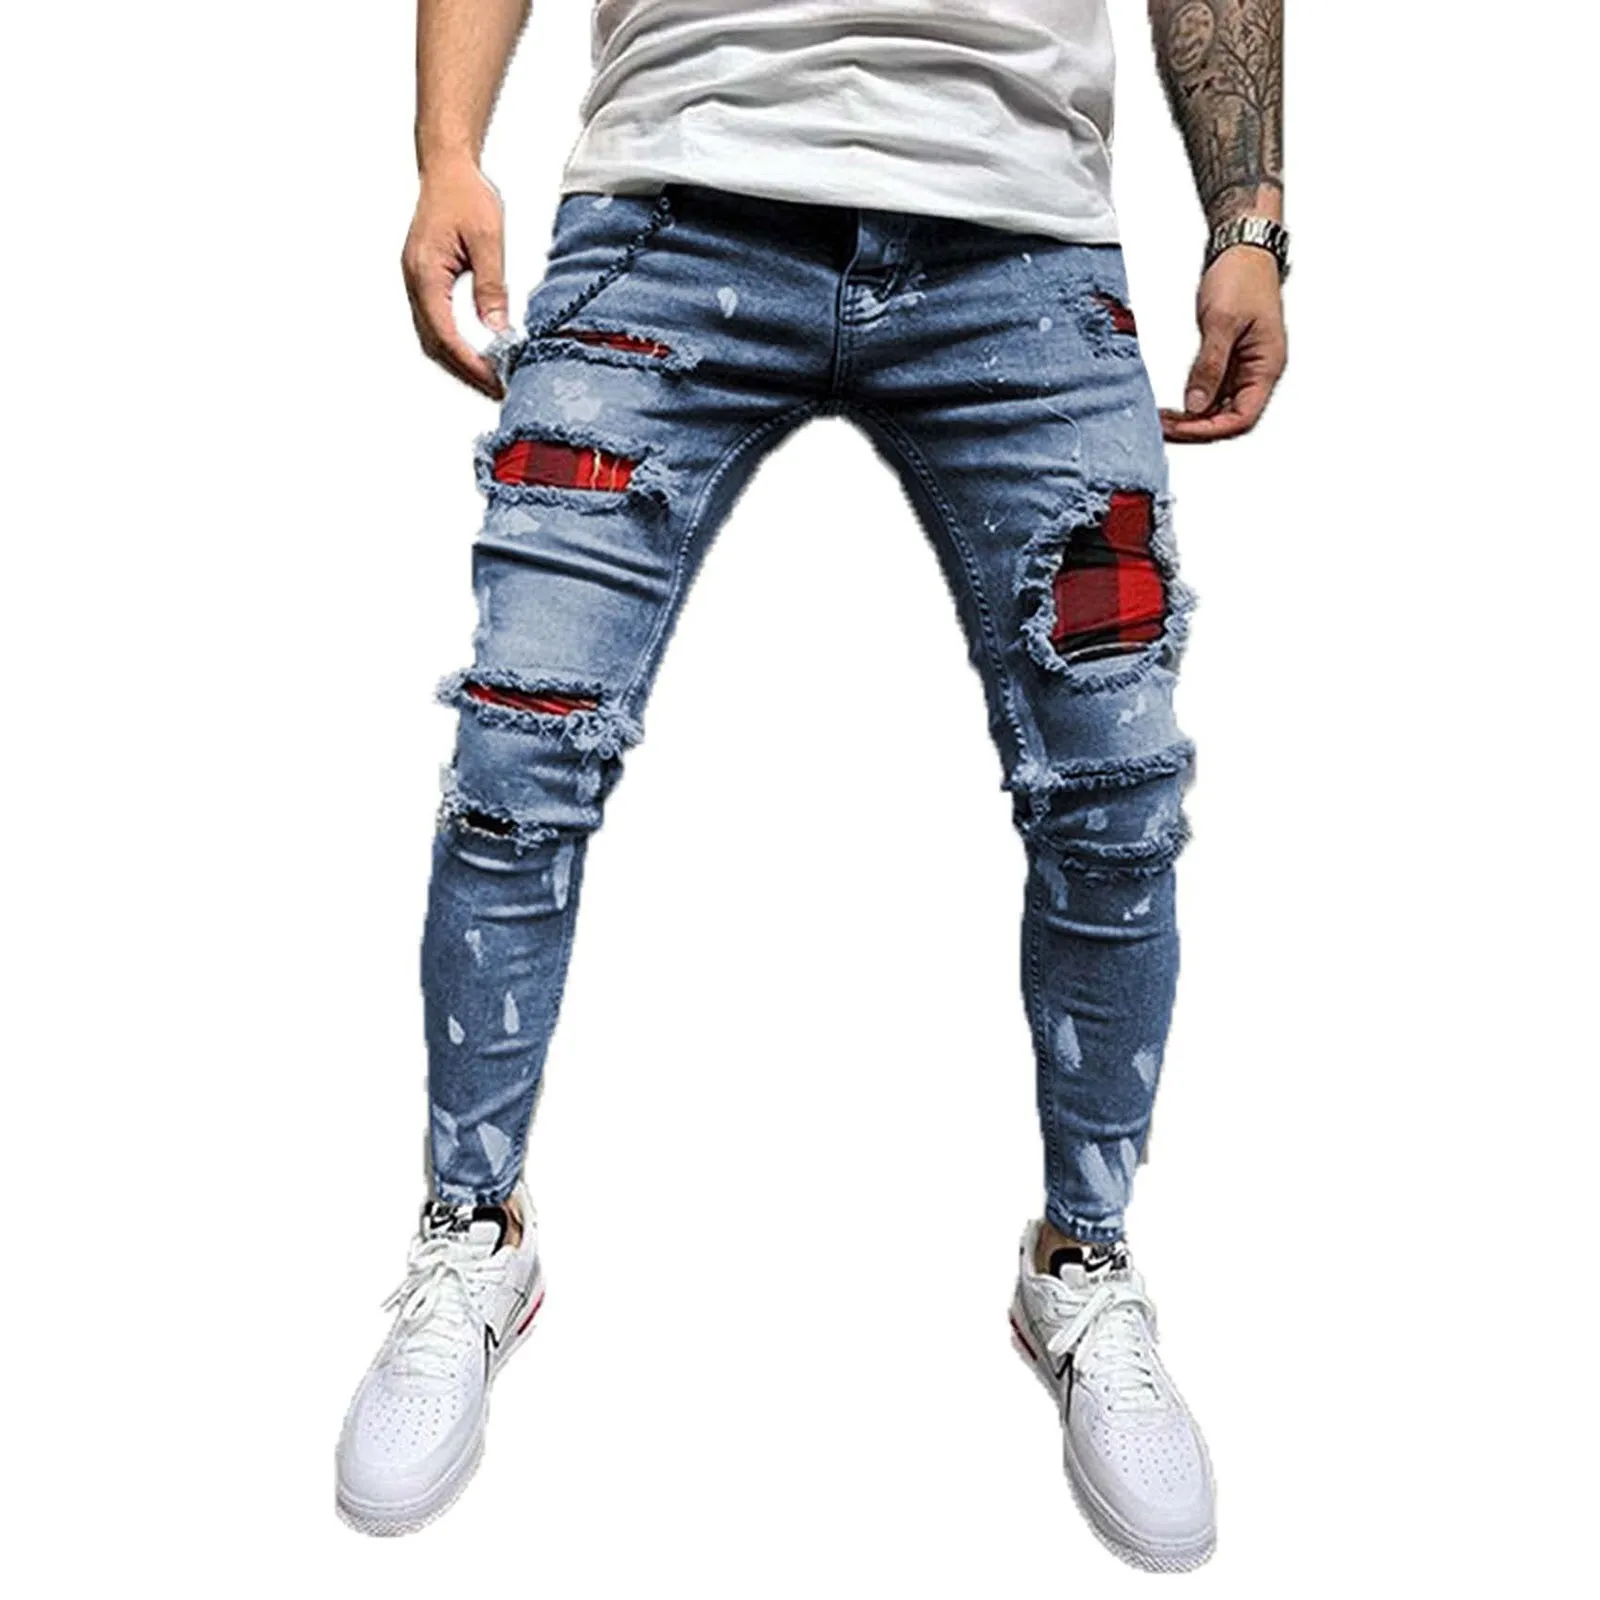 

Mens Casual Stretch Jeans Ripped Holes Slim Stretch Small Feet Motorcycle Fit Simple Denim Pants Fashion Male Cargo Pant Jeans